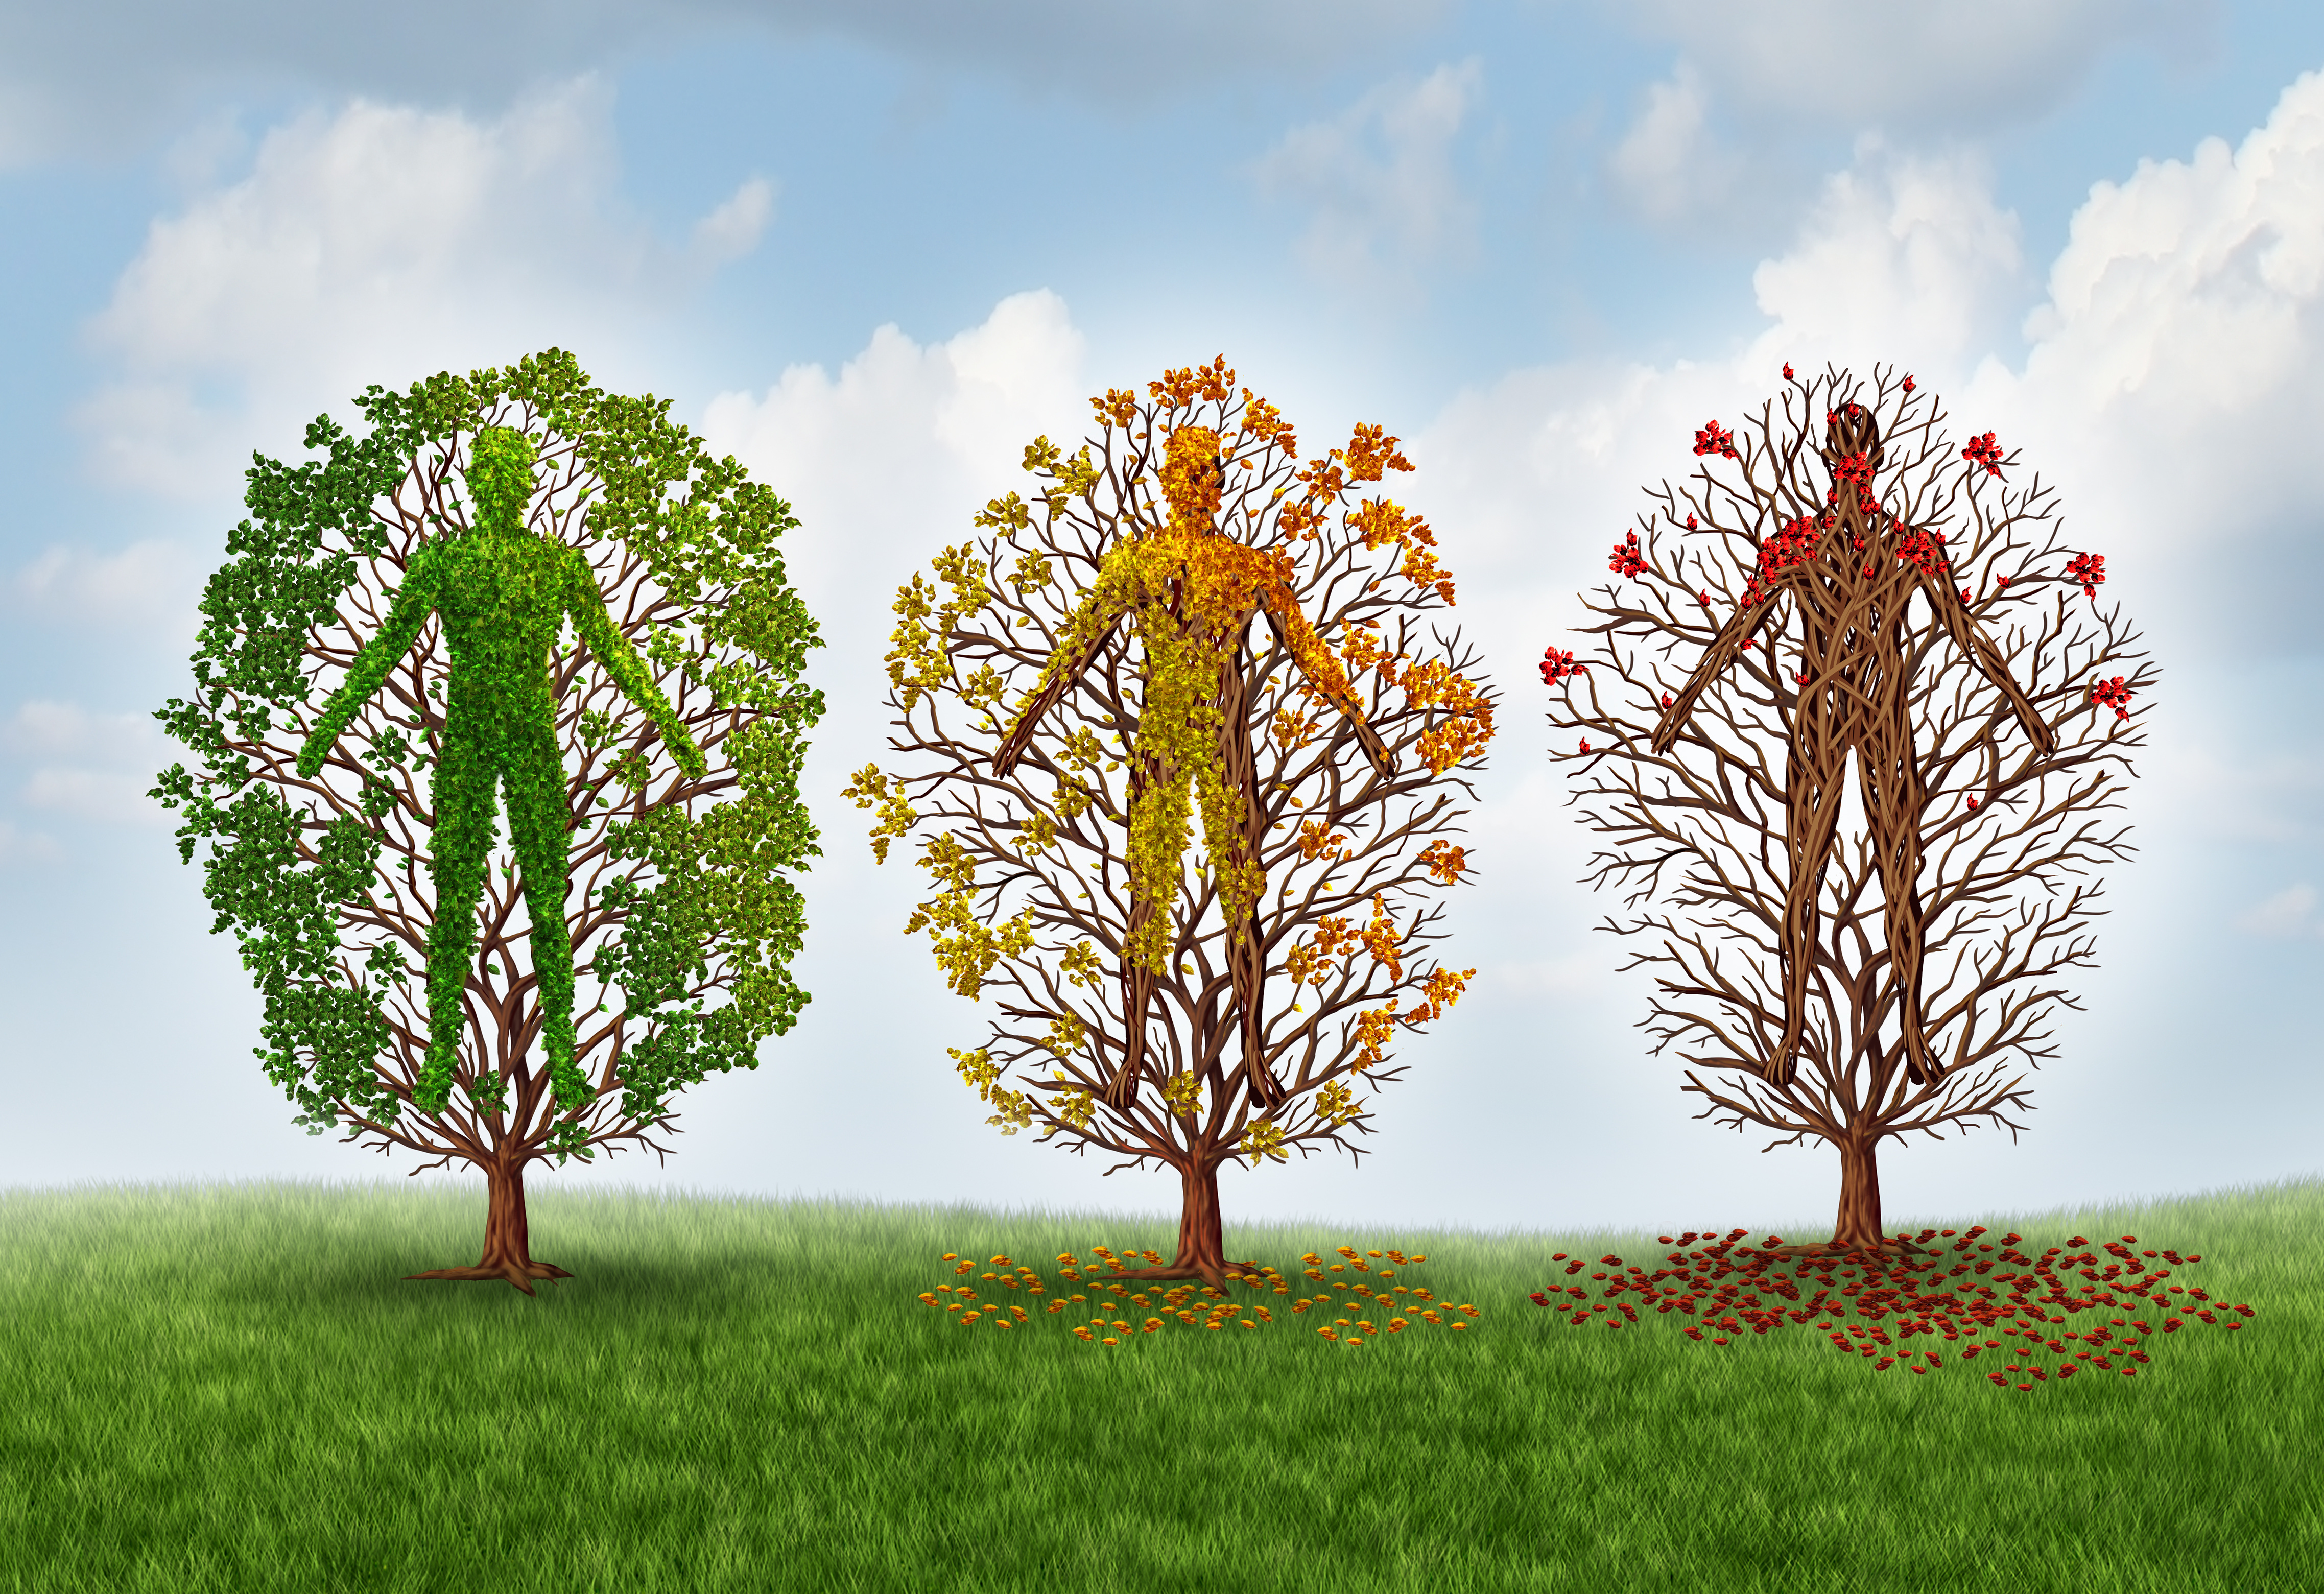 Graphic of three trees, side by side, each one with branches and leaves that make the shape of a person. The left one is green and full of foliage. The middle one is yellow and orange and has fewer leaves. The right one has only a handful of red leaves.